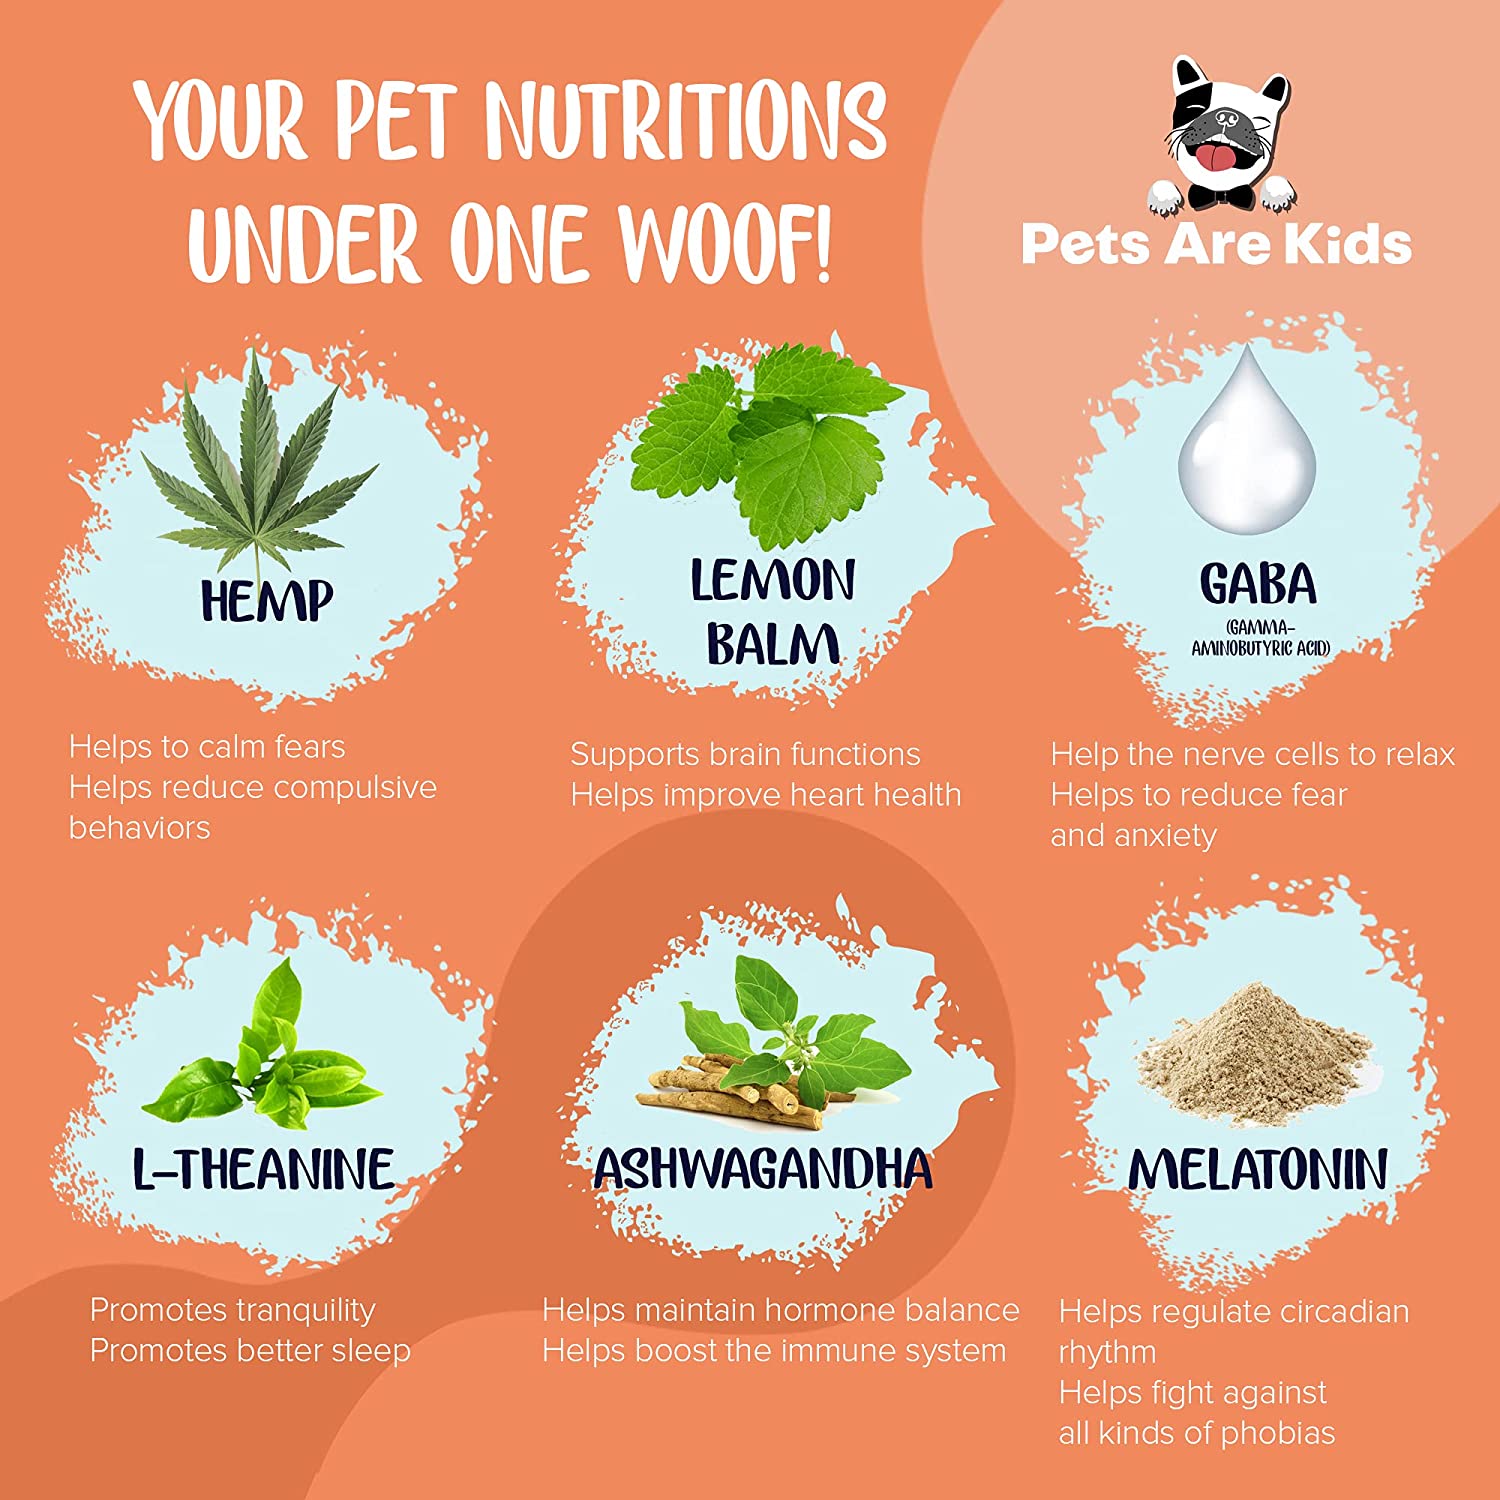 Your pet nutrition under one woof